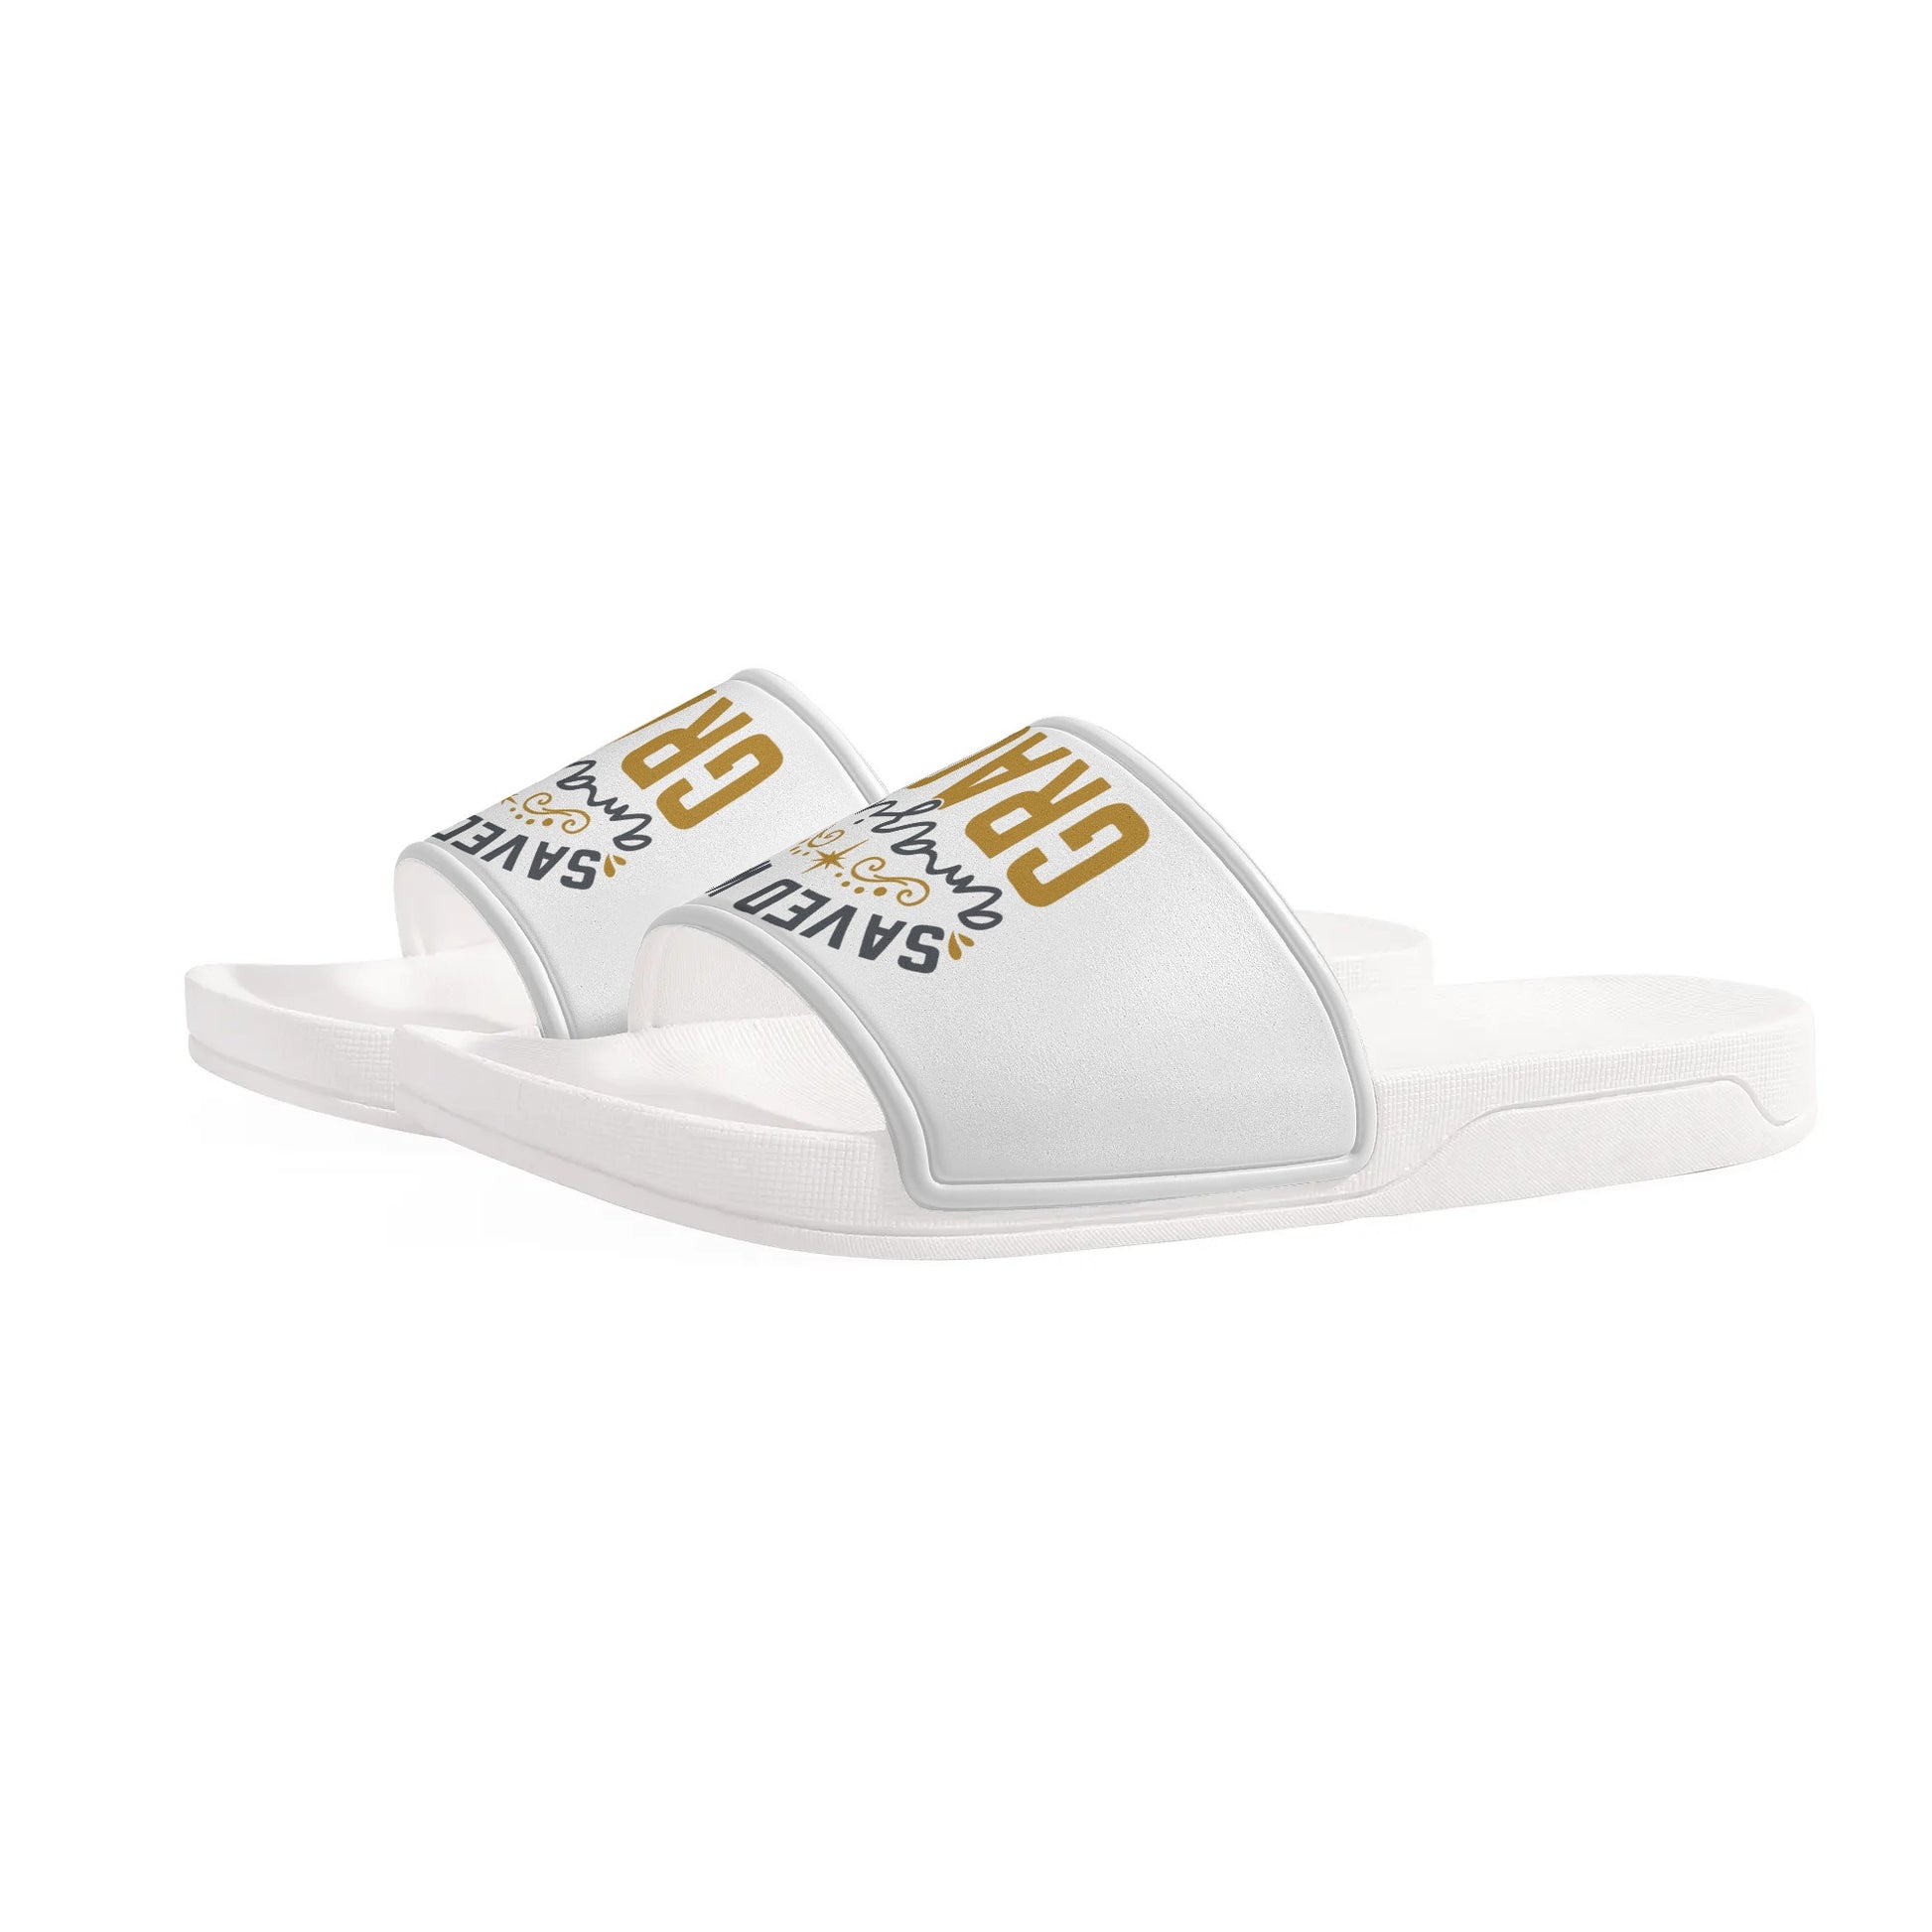 Saved With Amazing Grace Kids Christian Slide Sandals popcustoms